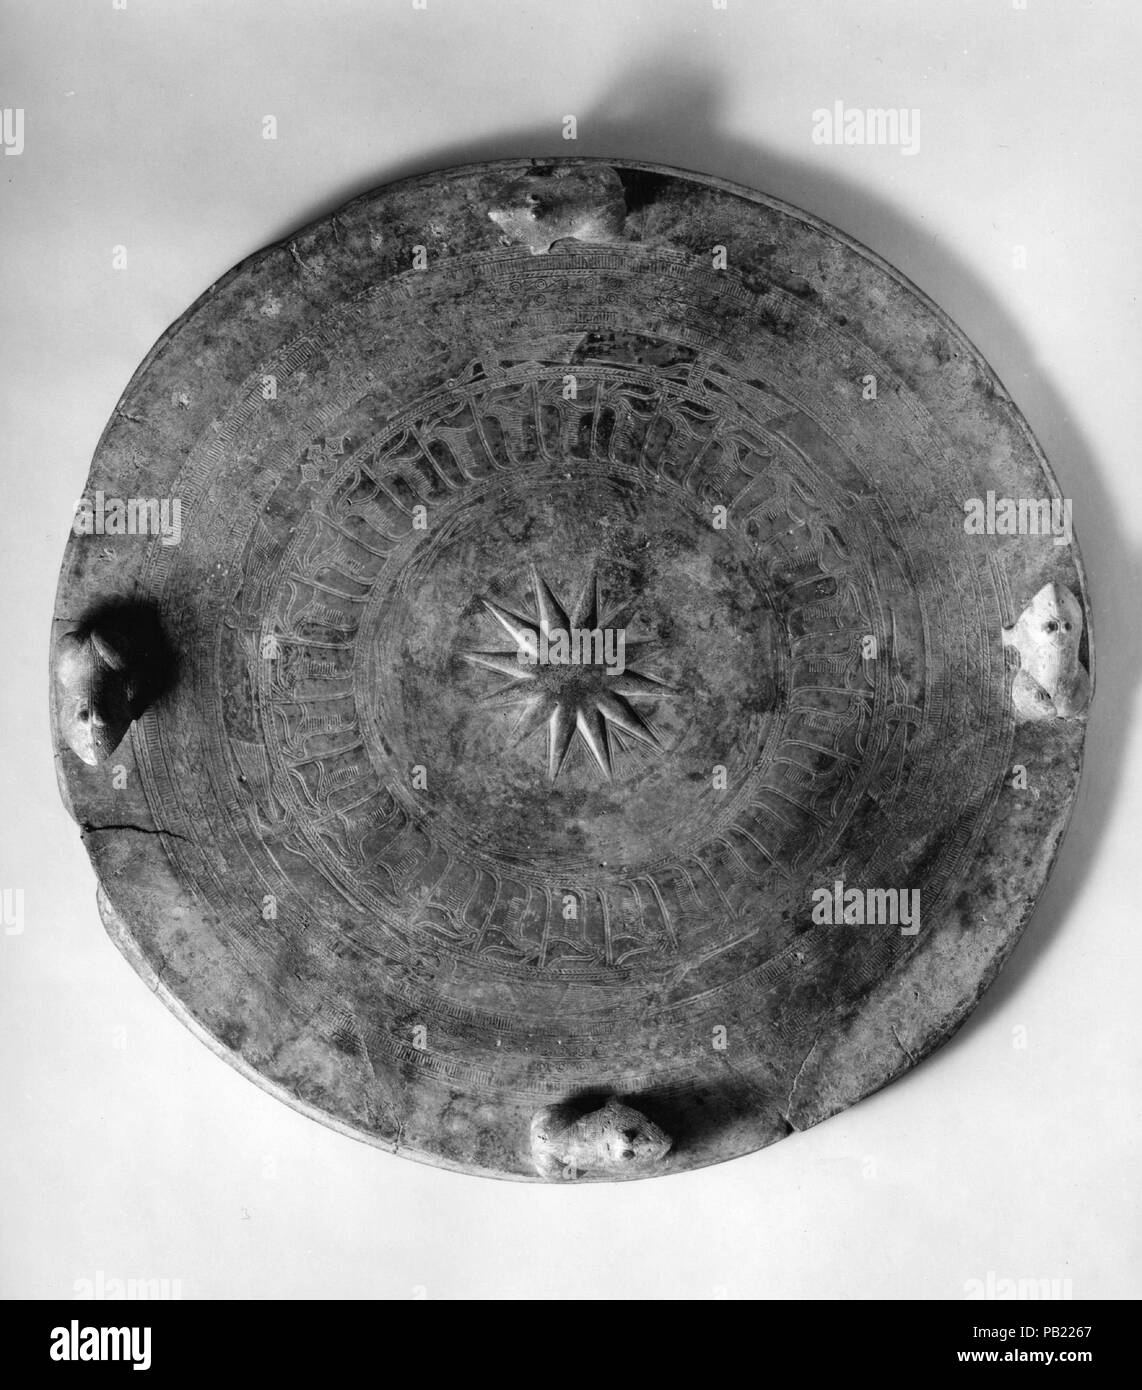 Tympanum of a Heger I Kettledrum. Culture: Vietnam. Dimensions: Diam. 27 23/32  in. (70.5 cm). Date: ca. 500 B.C.-A.D. 300.  Dongson kettledrums of this type must have been widely traded in antiquity, as many have been found in Indonesia. Museum: Metropolitan Museum of Art, New York, USA. Stock Photo